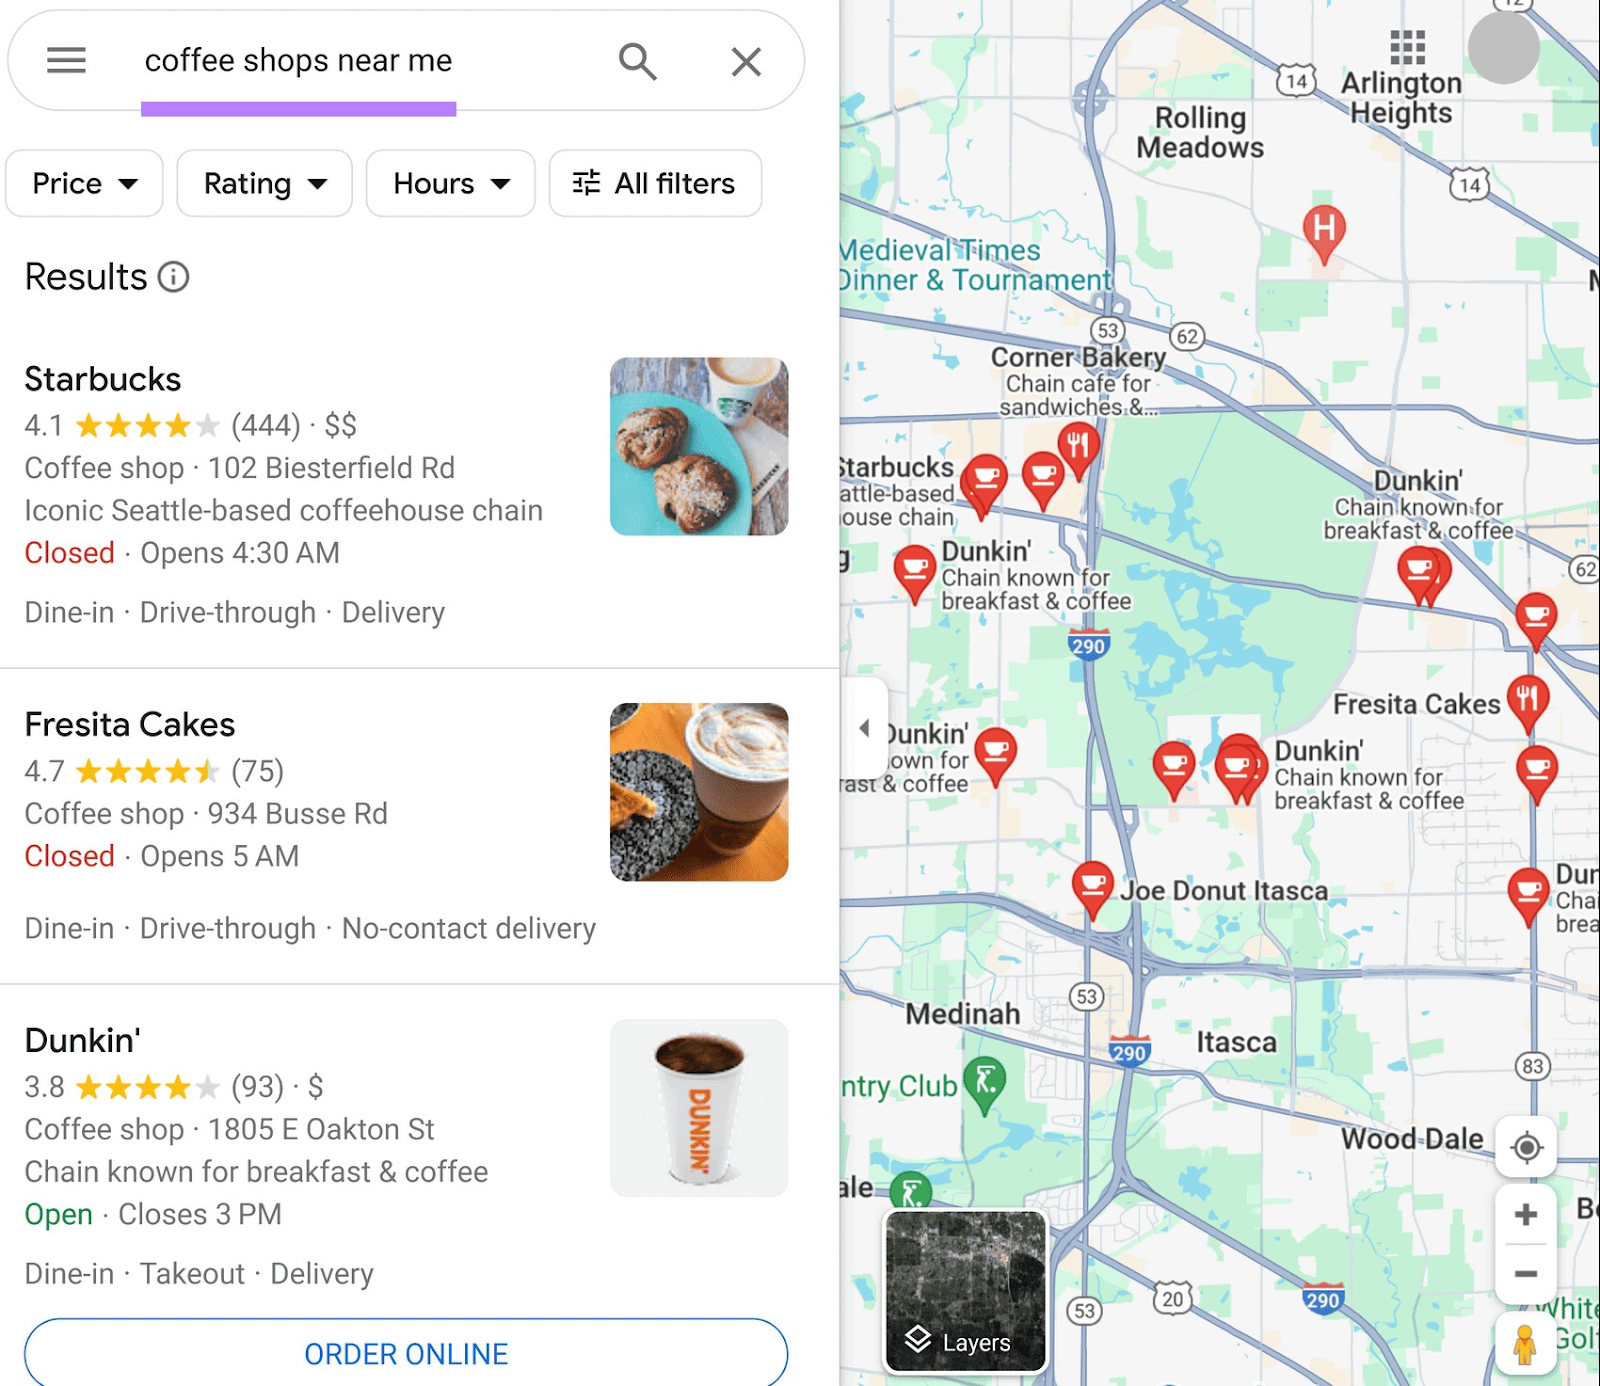 Google Maps results for "coffee shops near me"